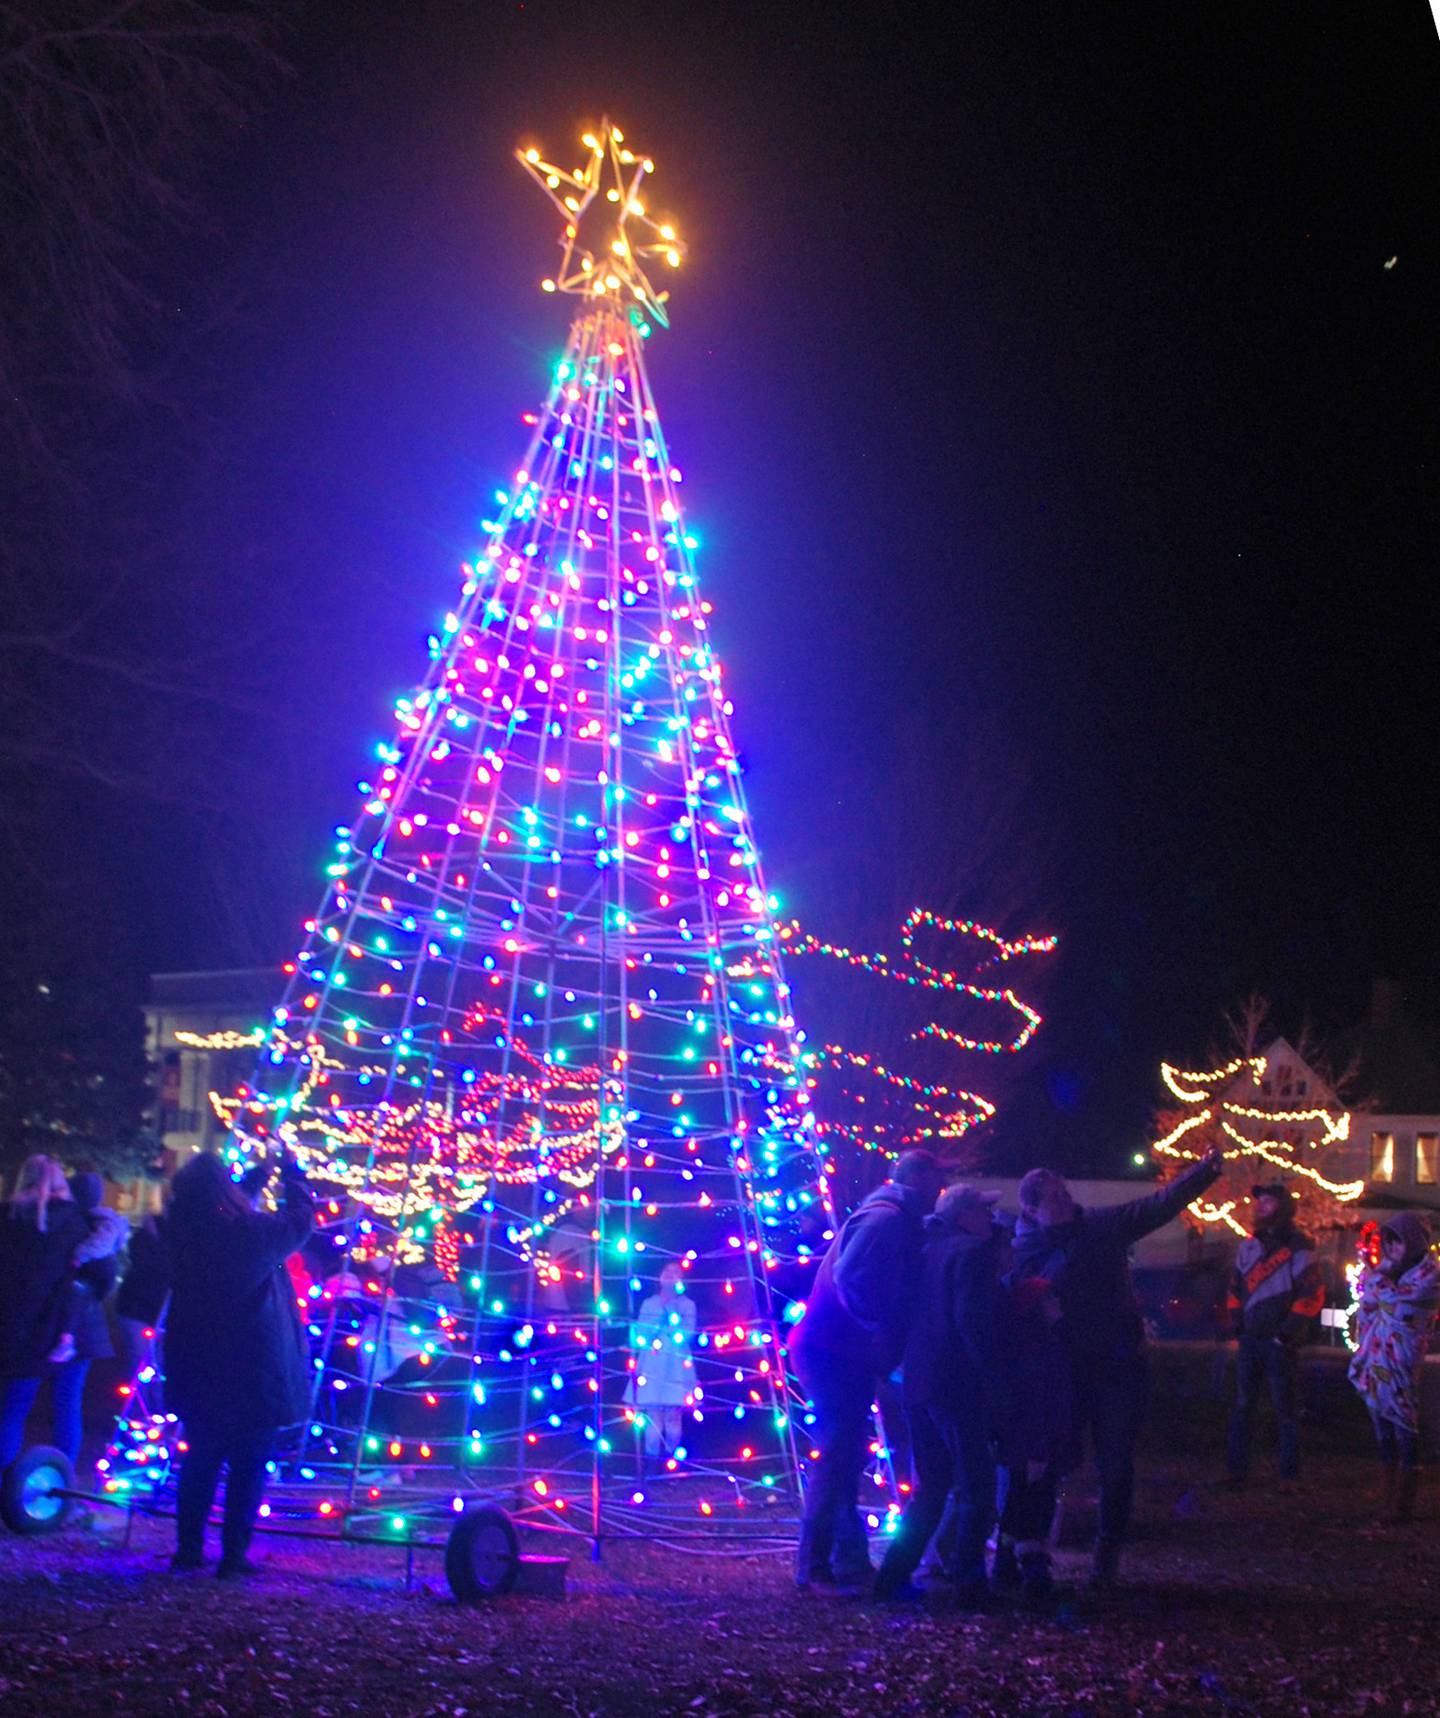 Families take photos and selfies near the tall LED-lit tree in Streator City Park after the Light Up Streator Committee illuminated its display for the holiday season Saturday, Nov. 26, 2022.